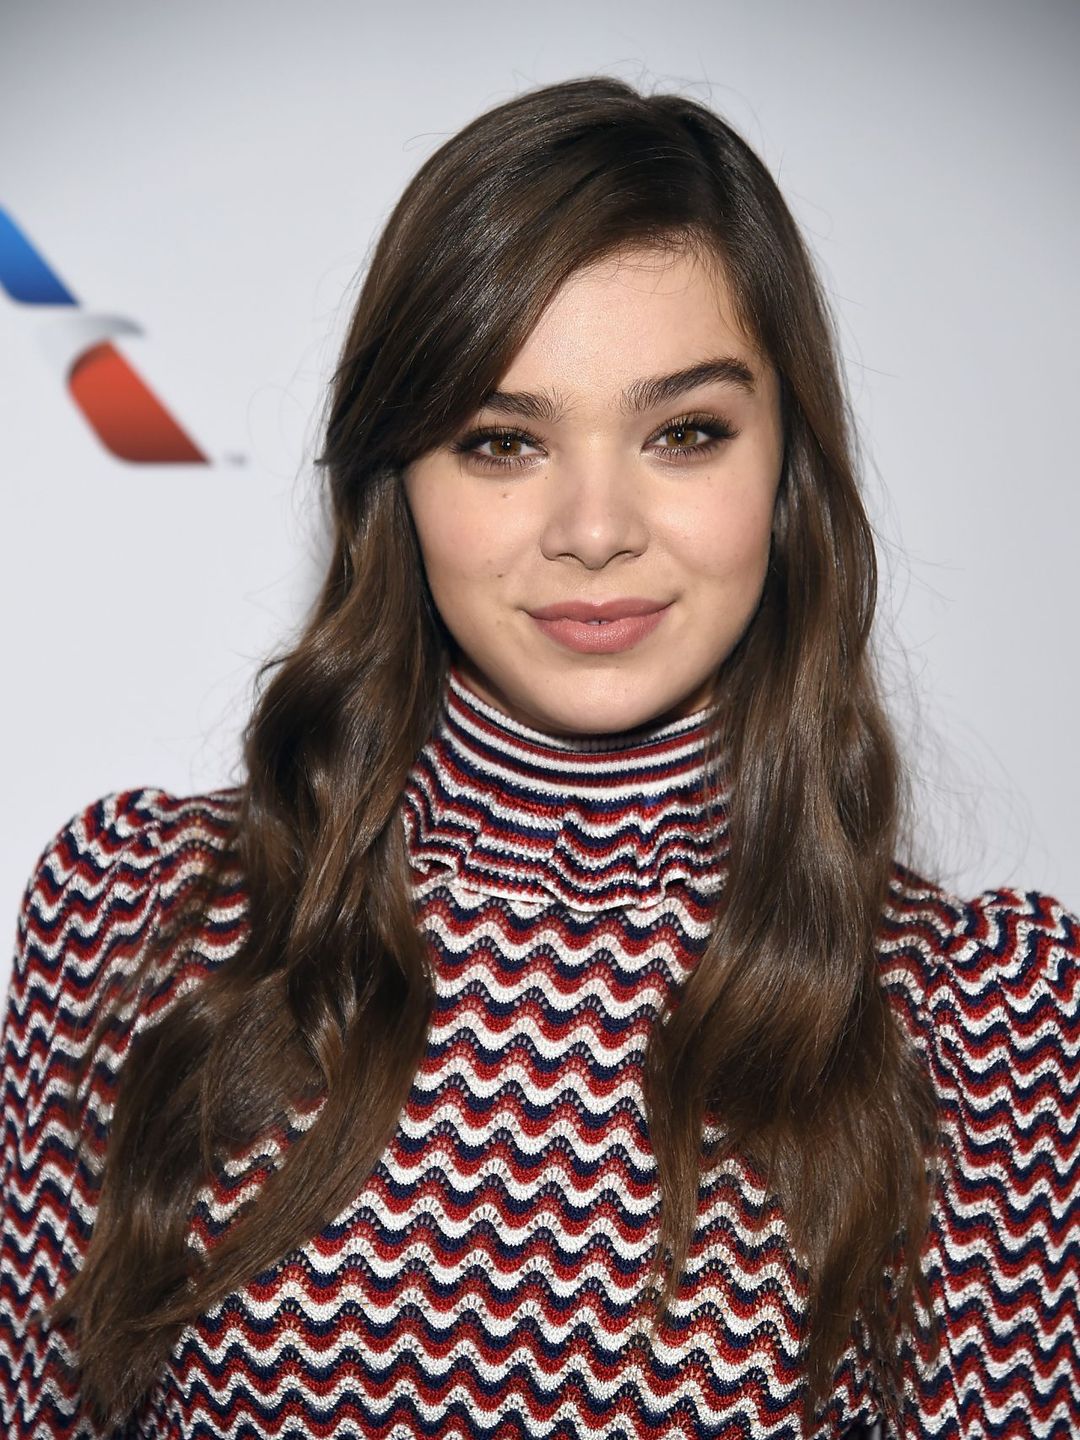 Hailee Steinfeld who are her parents